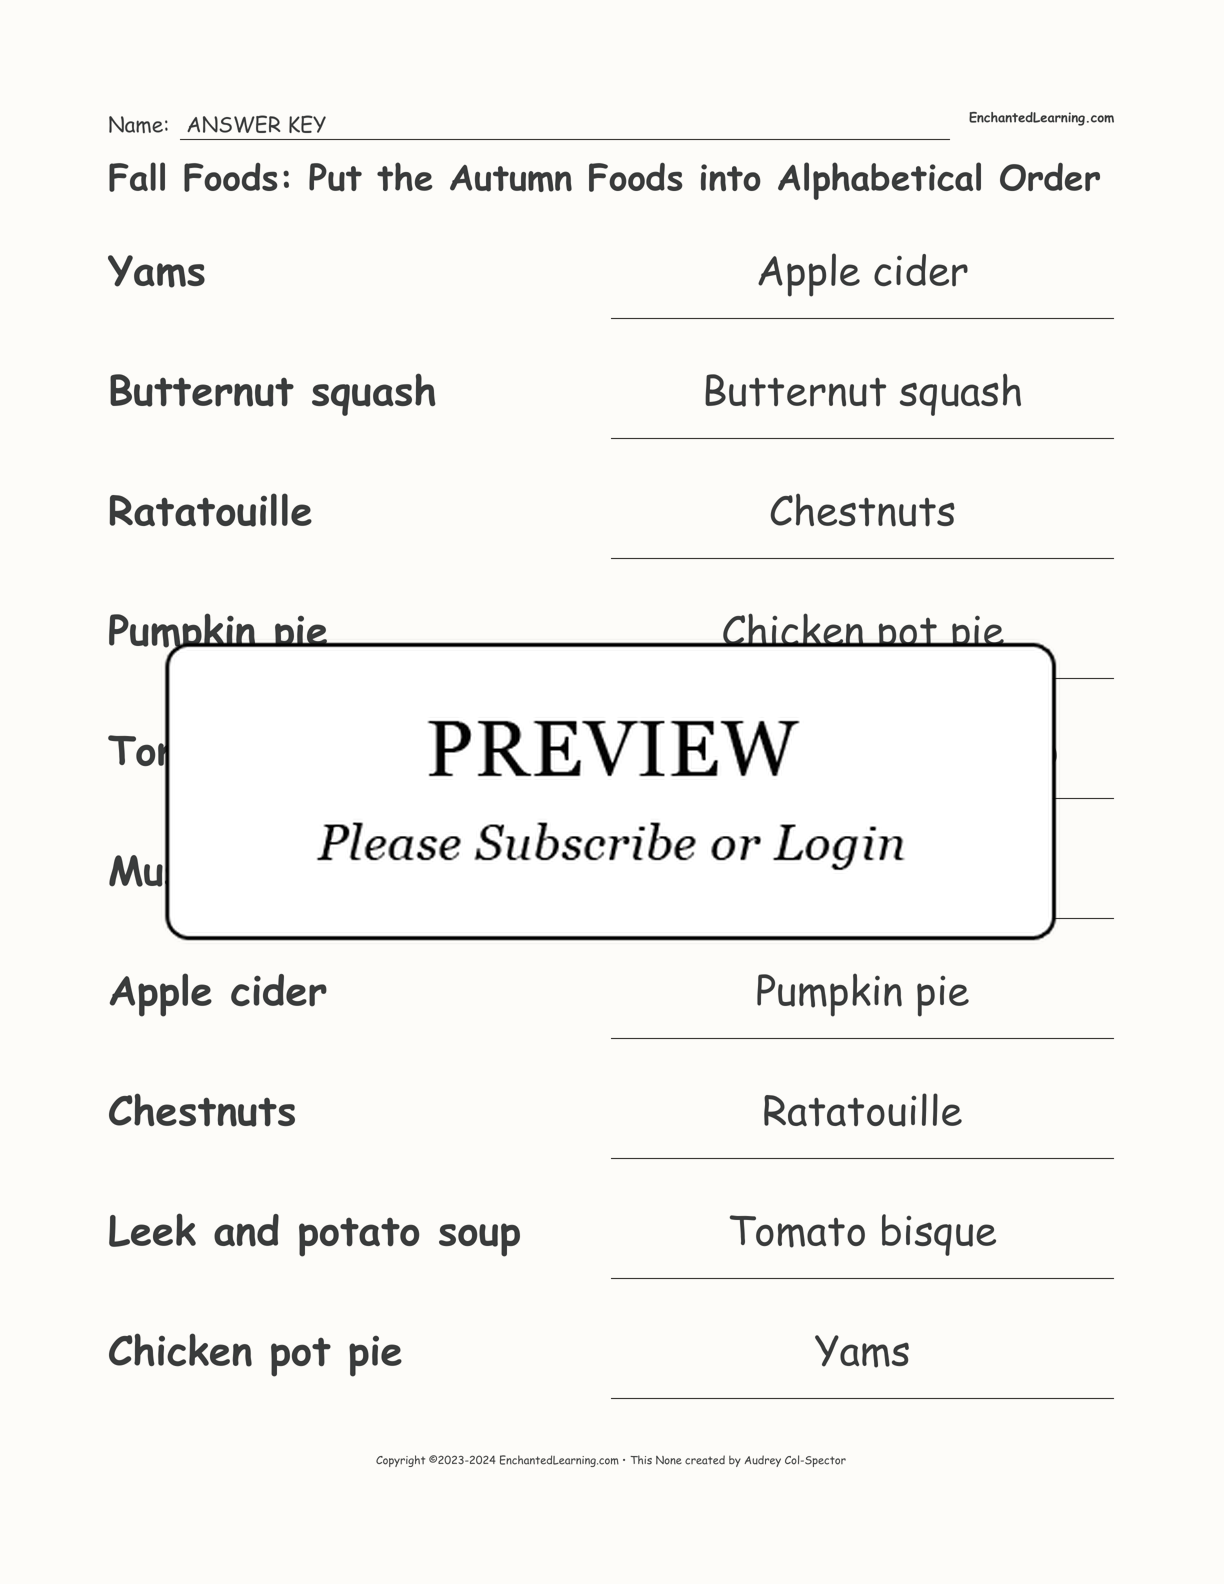 Fall Foods: Put the Autumn Foods into Alphabetical Order interactive worksheet page 2